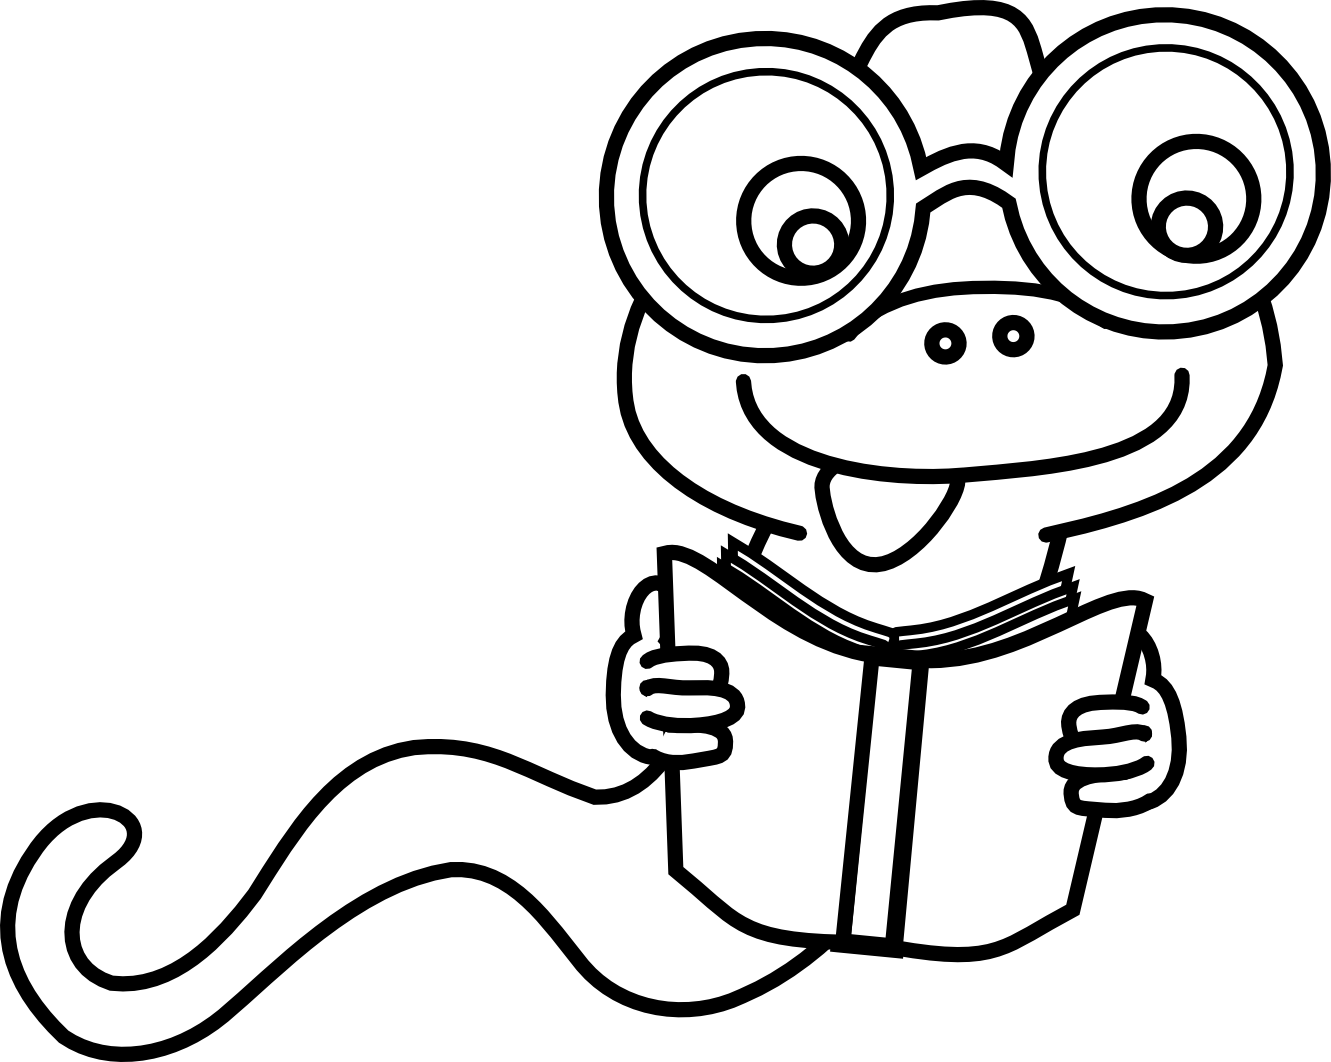 Bookworm Clipart Black And White | Clipart Panda - Free Clipart Images